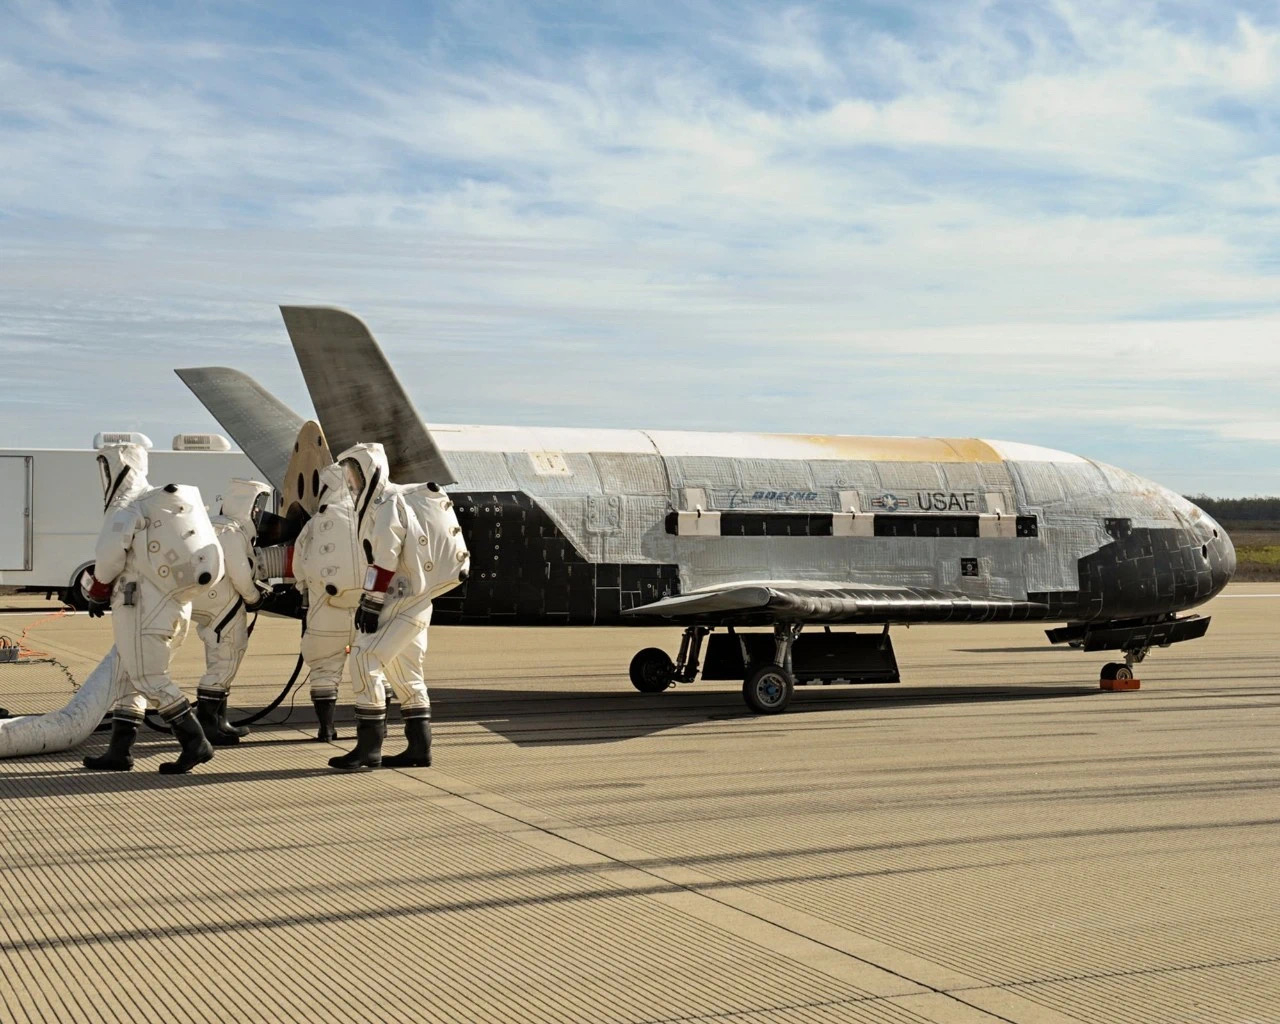 The Air Force launched the sixth mission of the uncrewed X-37B spy plane toward orbit at 9:14 a.m. EDT Sunday